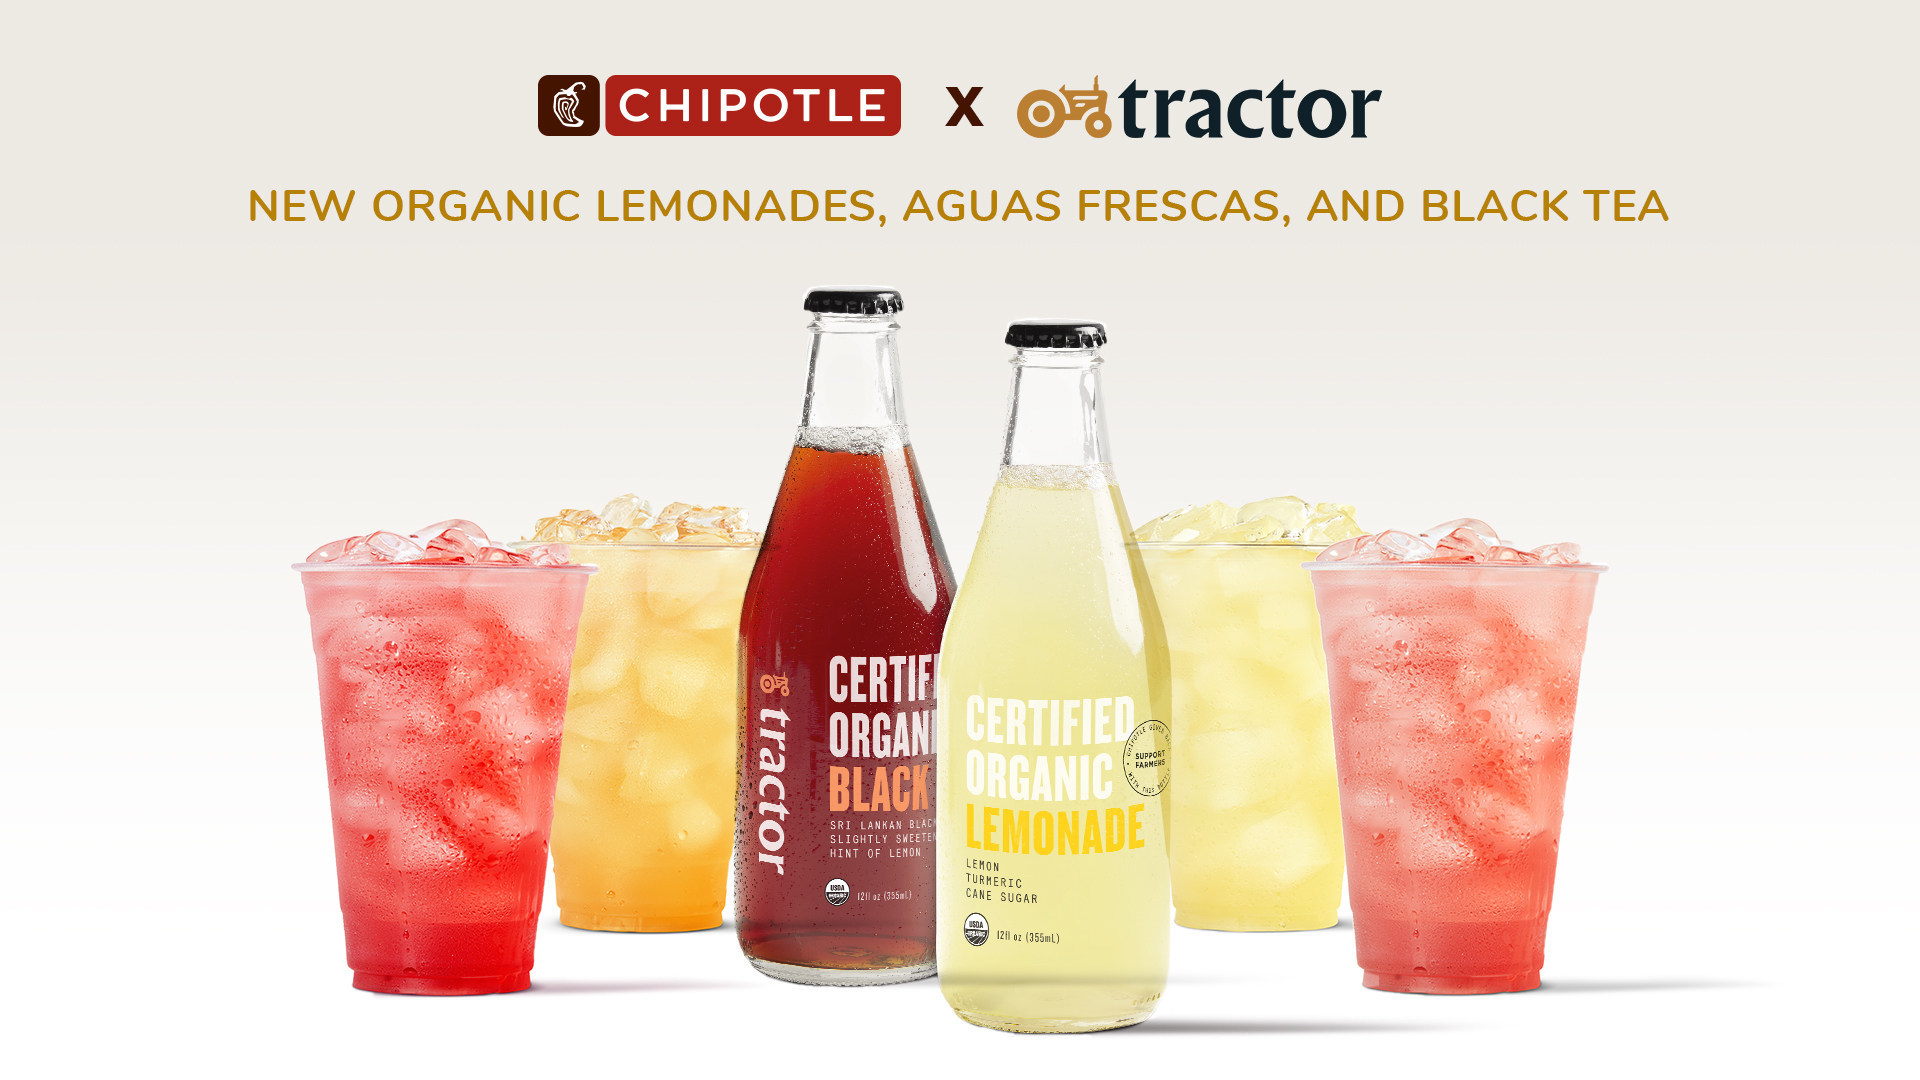 The Collaboration Between Chipotle and Tractor Beverage